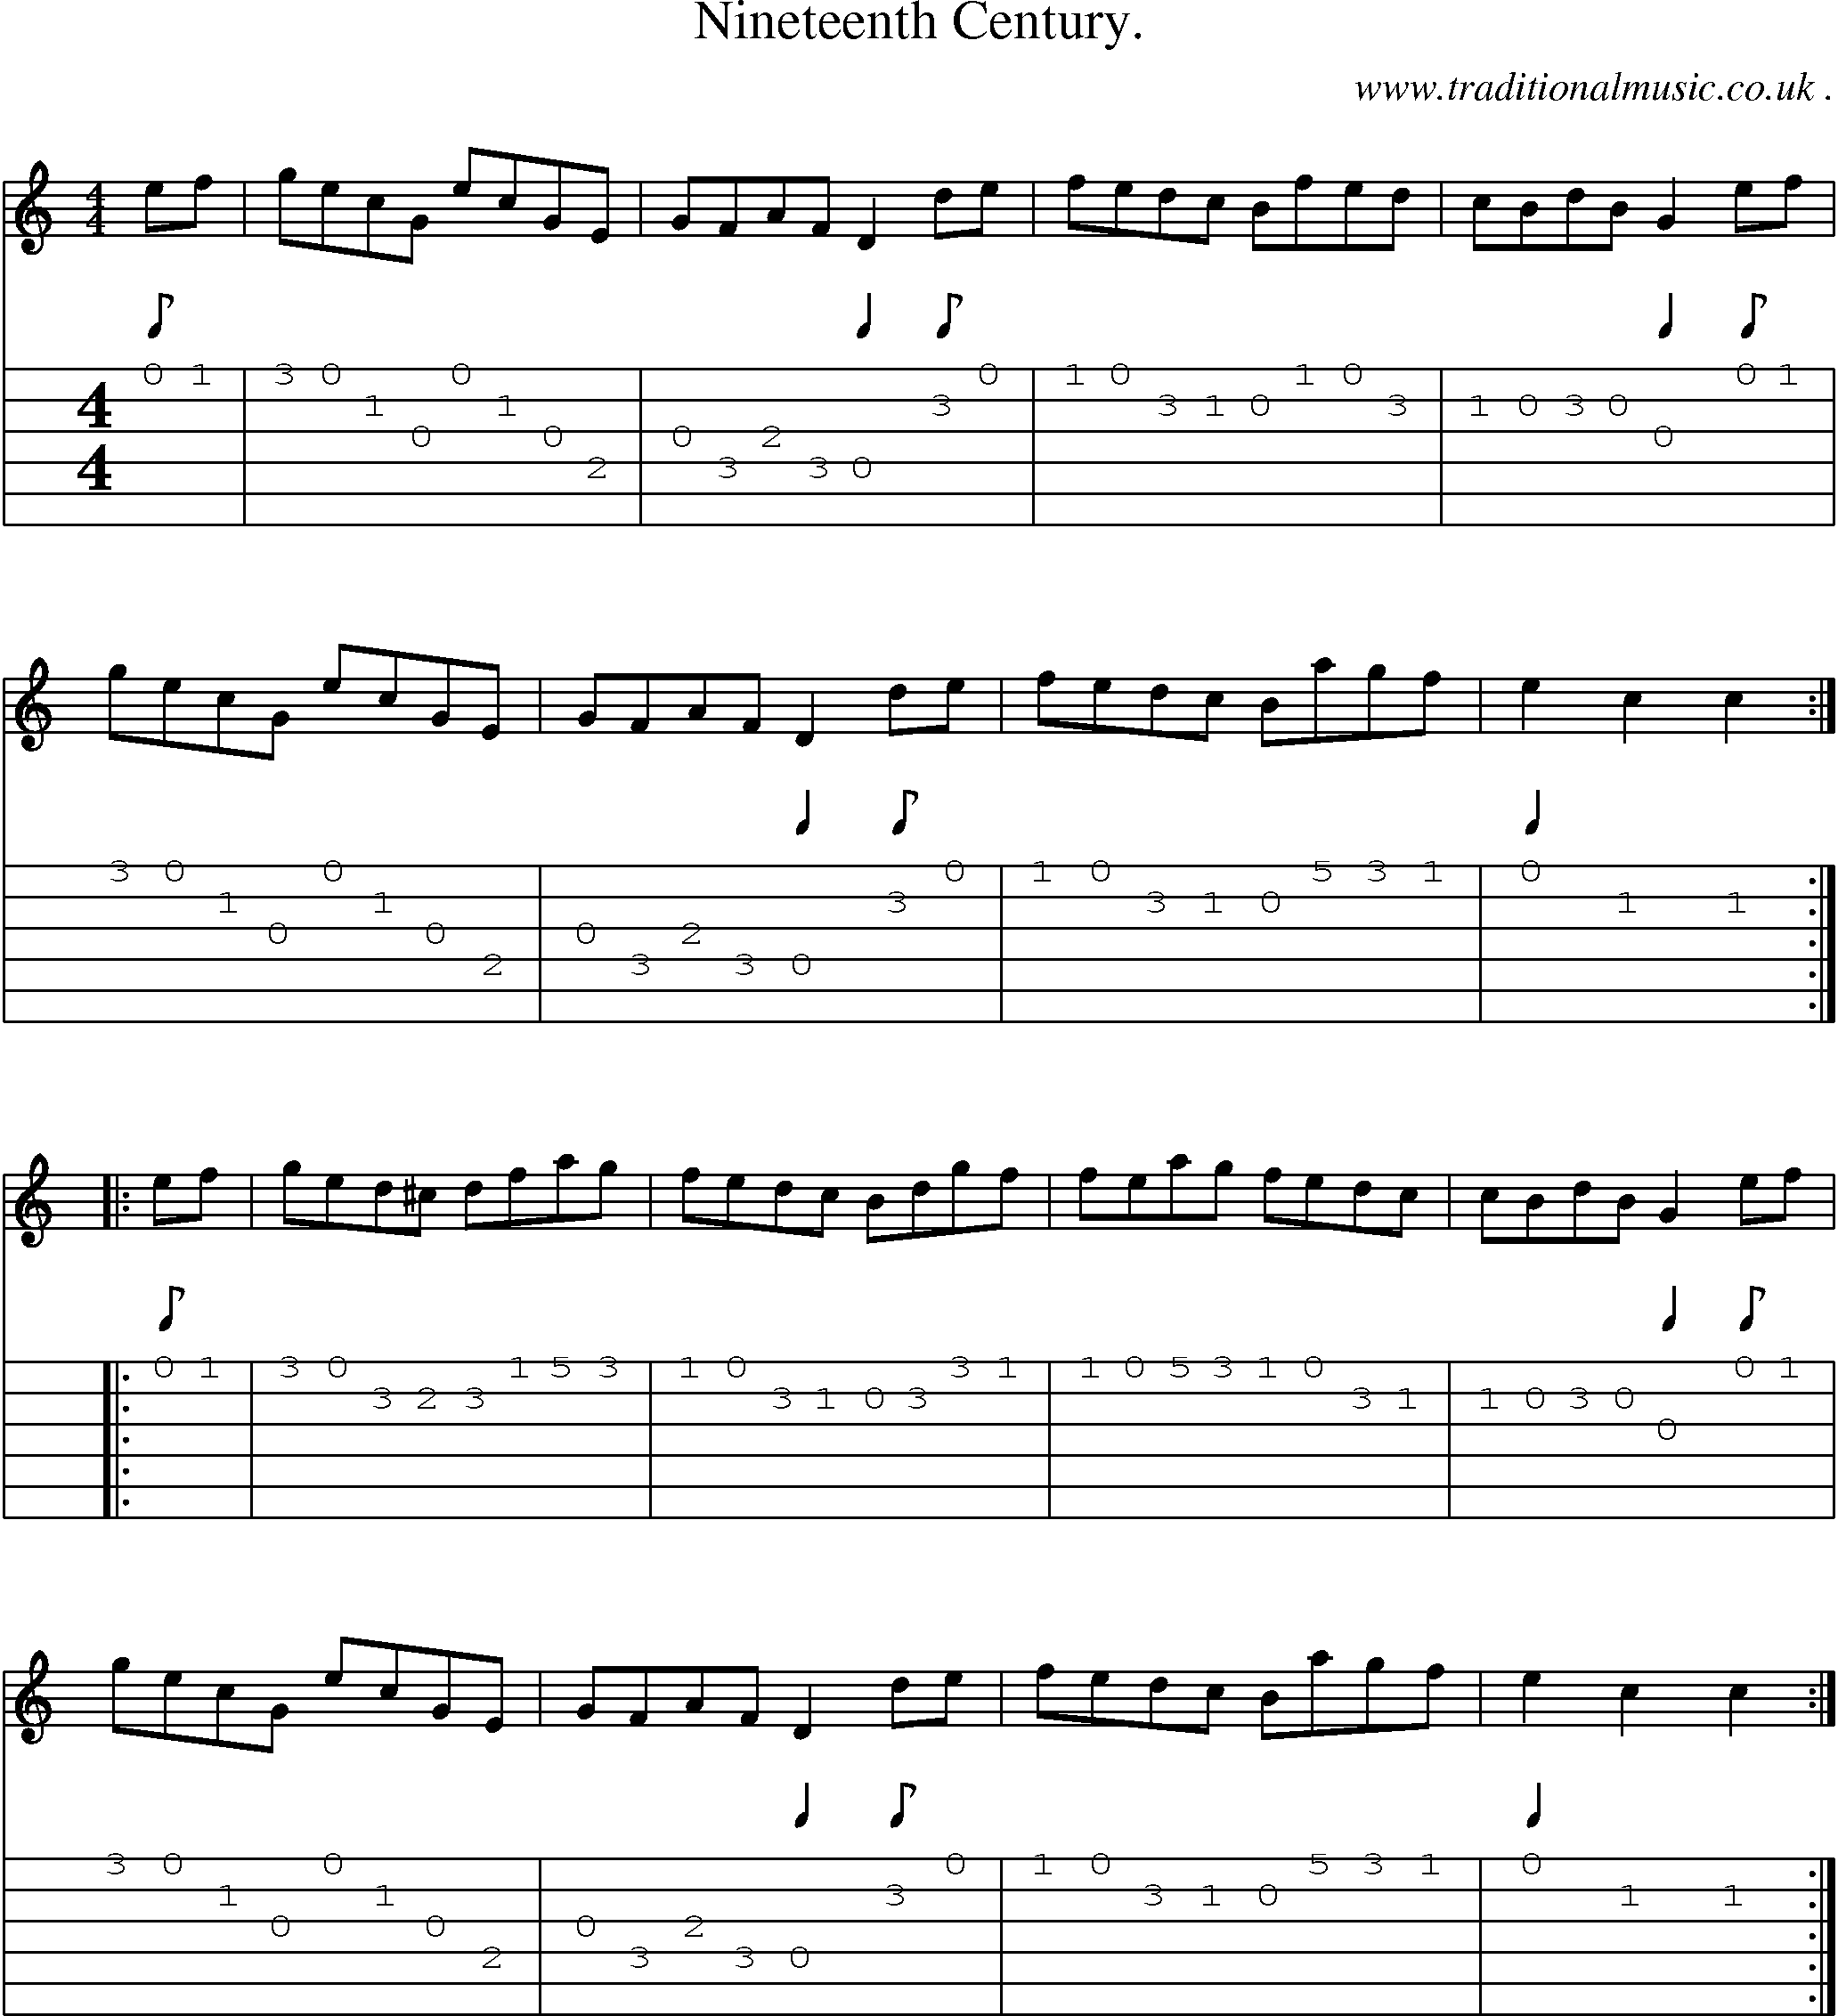 Sheet-Music and Guitar Tabs for Nineteenth Century